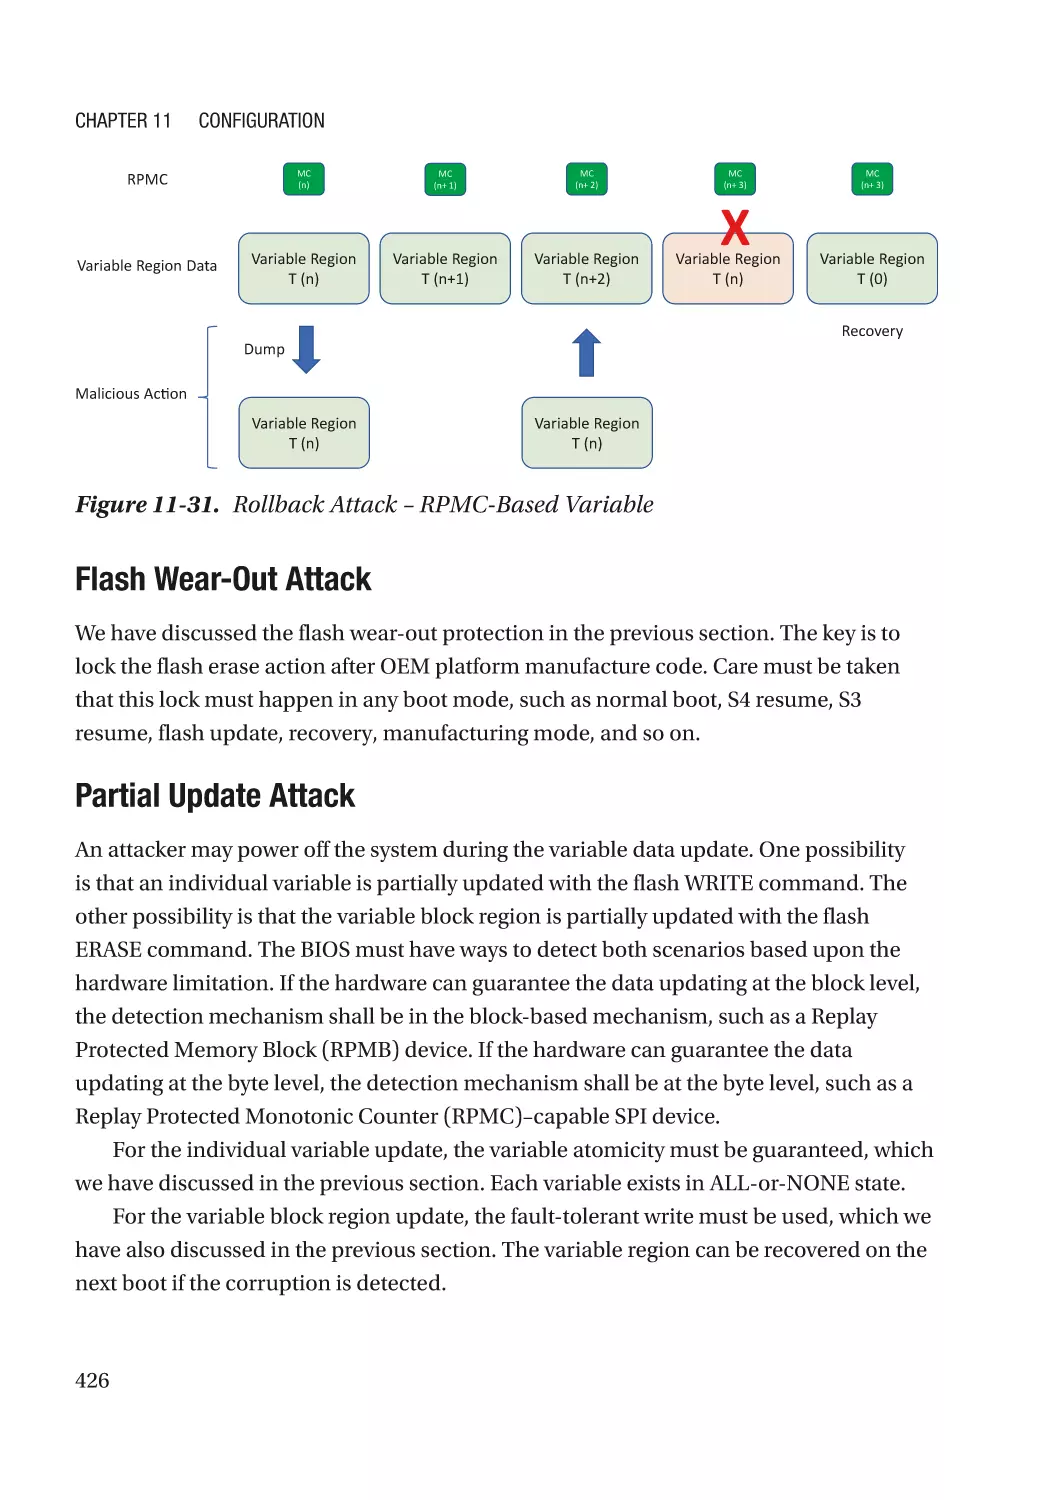 Flash Wear-Out Attack
Partial Update Attack